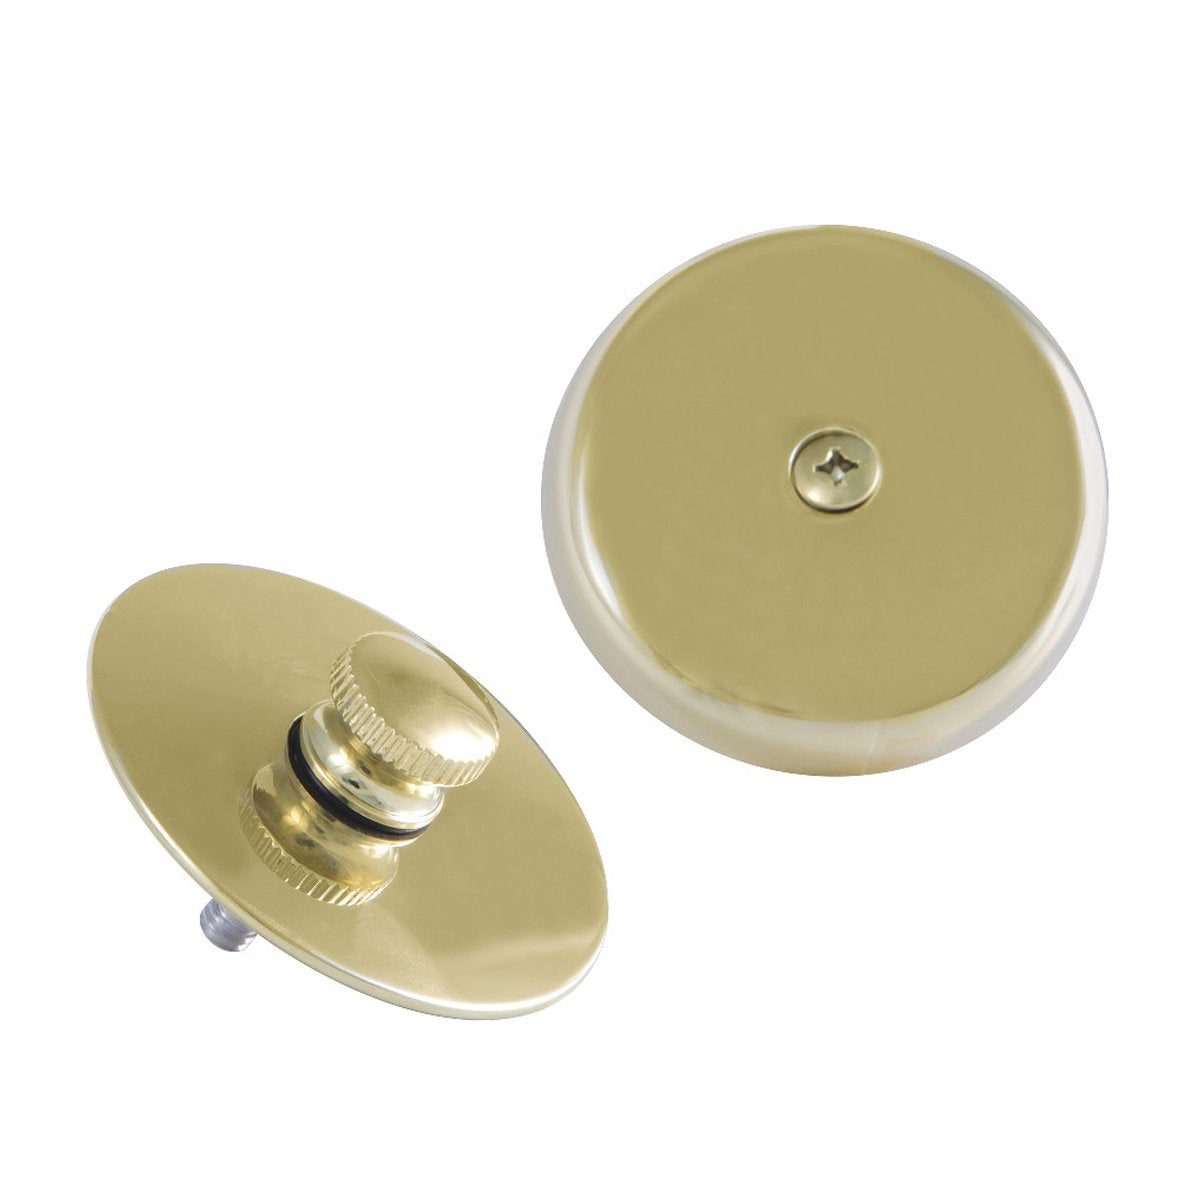 Kingston Brass Tub Drain Stopper with Overflow Plate Replacement Trim Kit